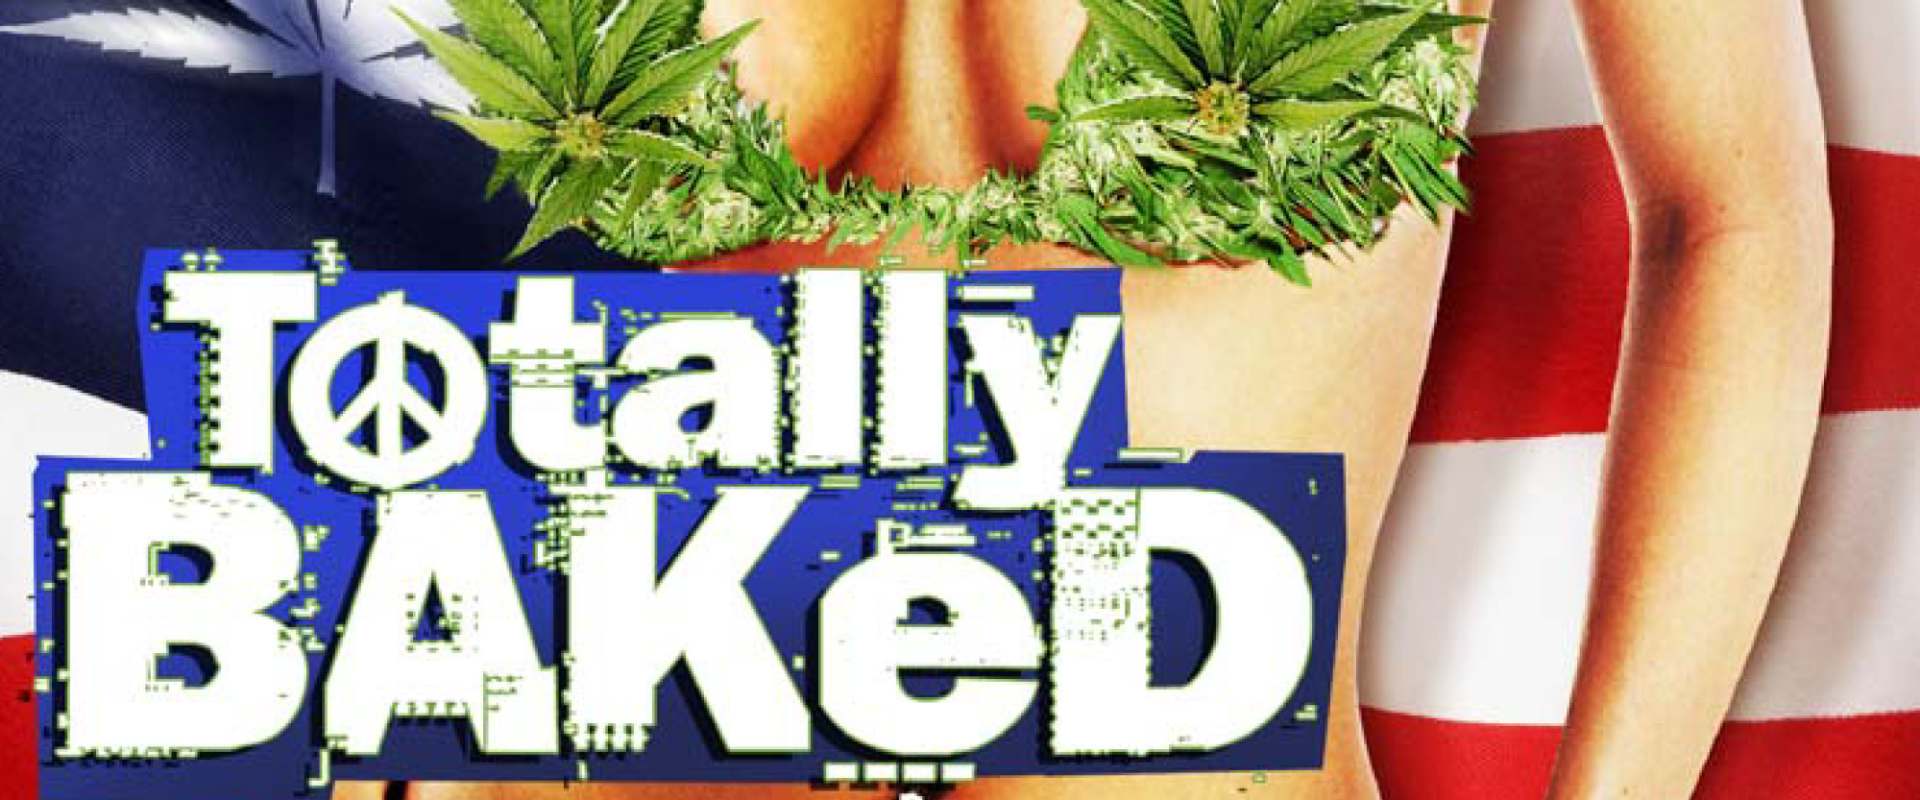 Totally Baked background 2